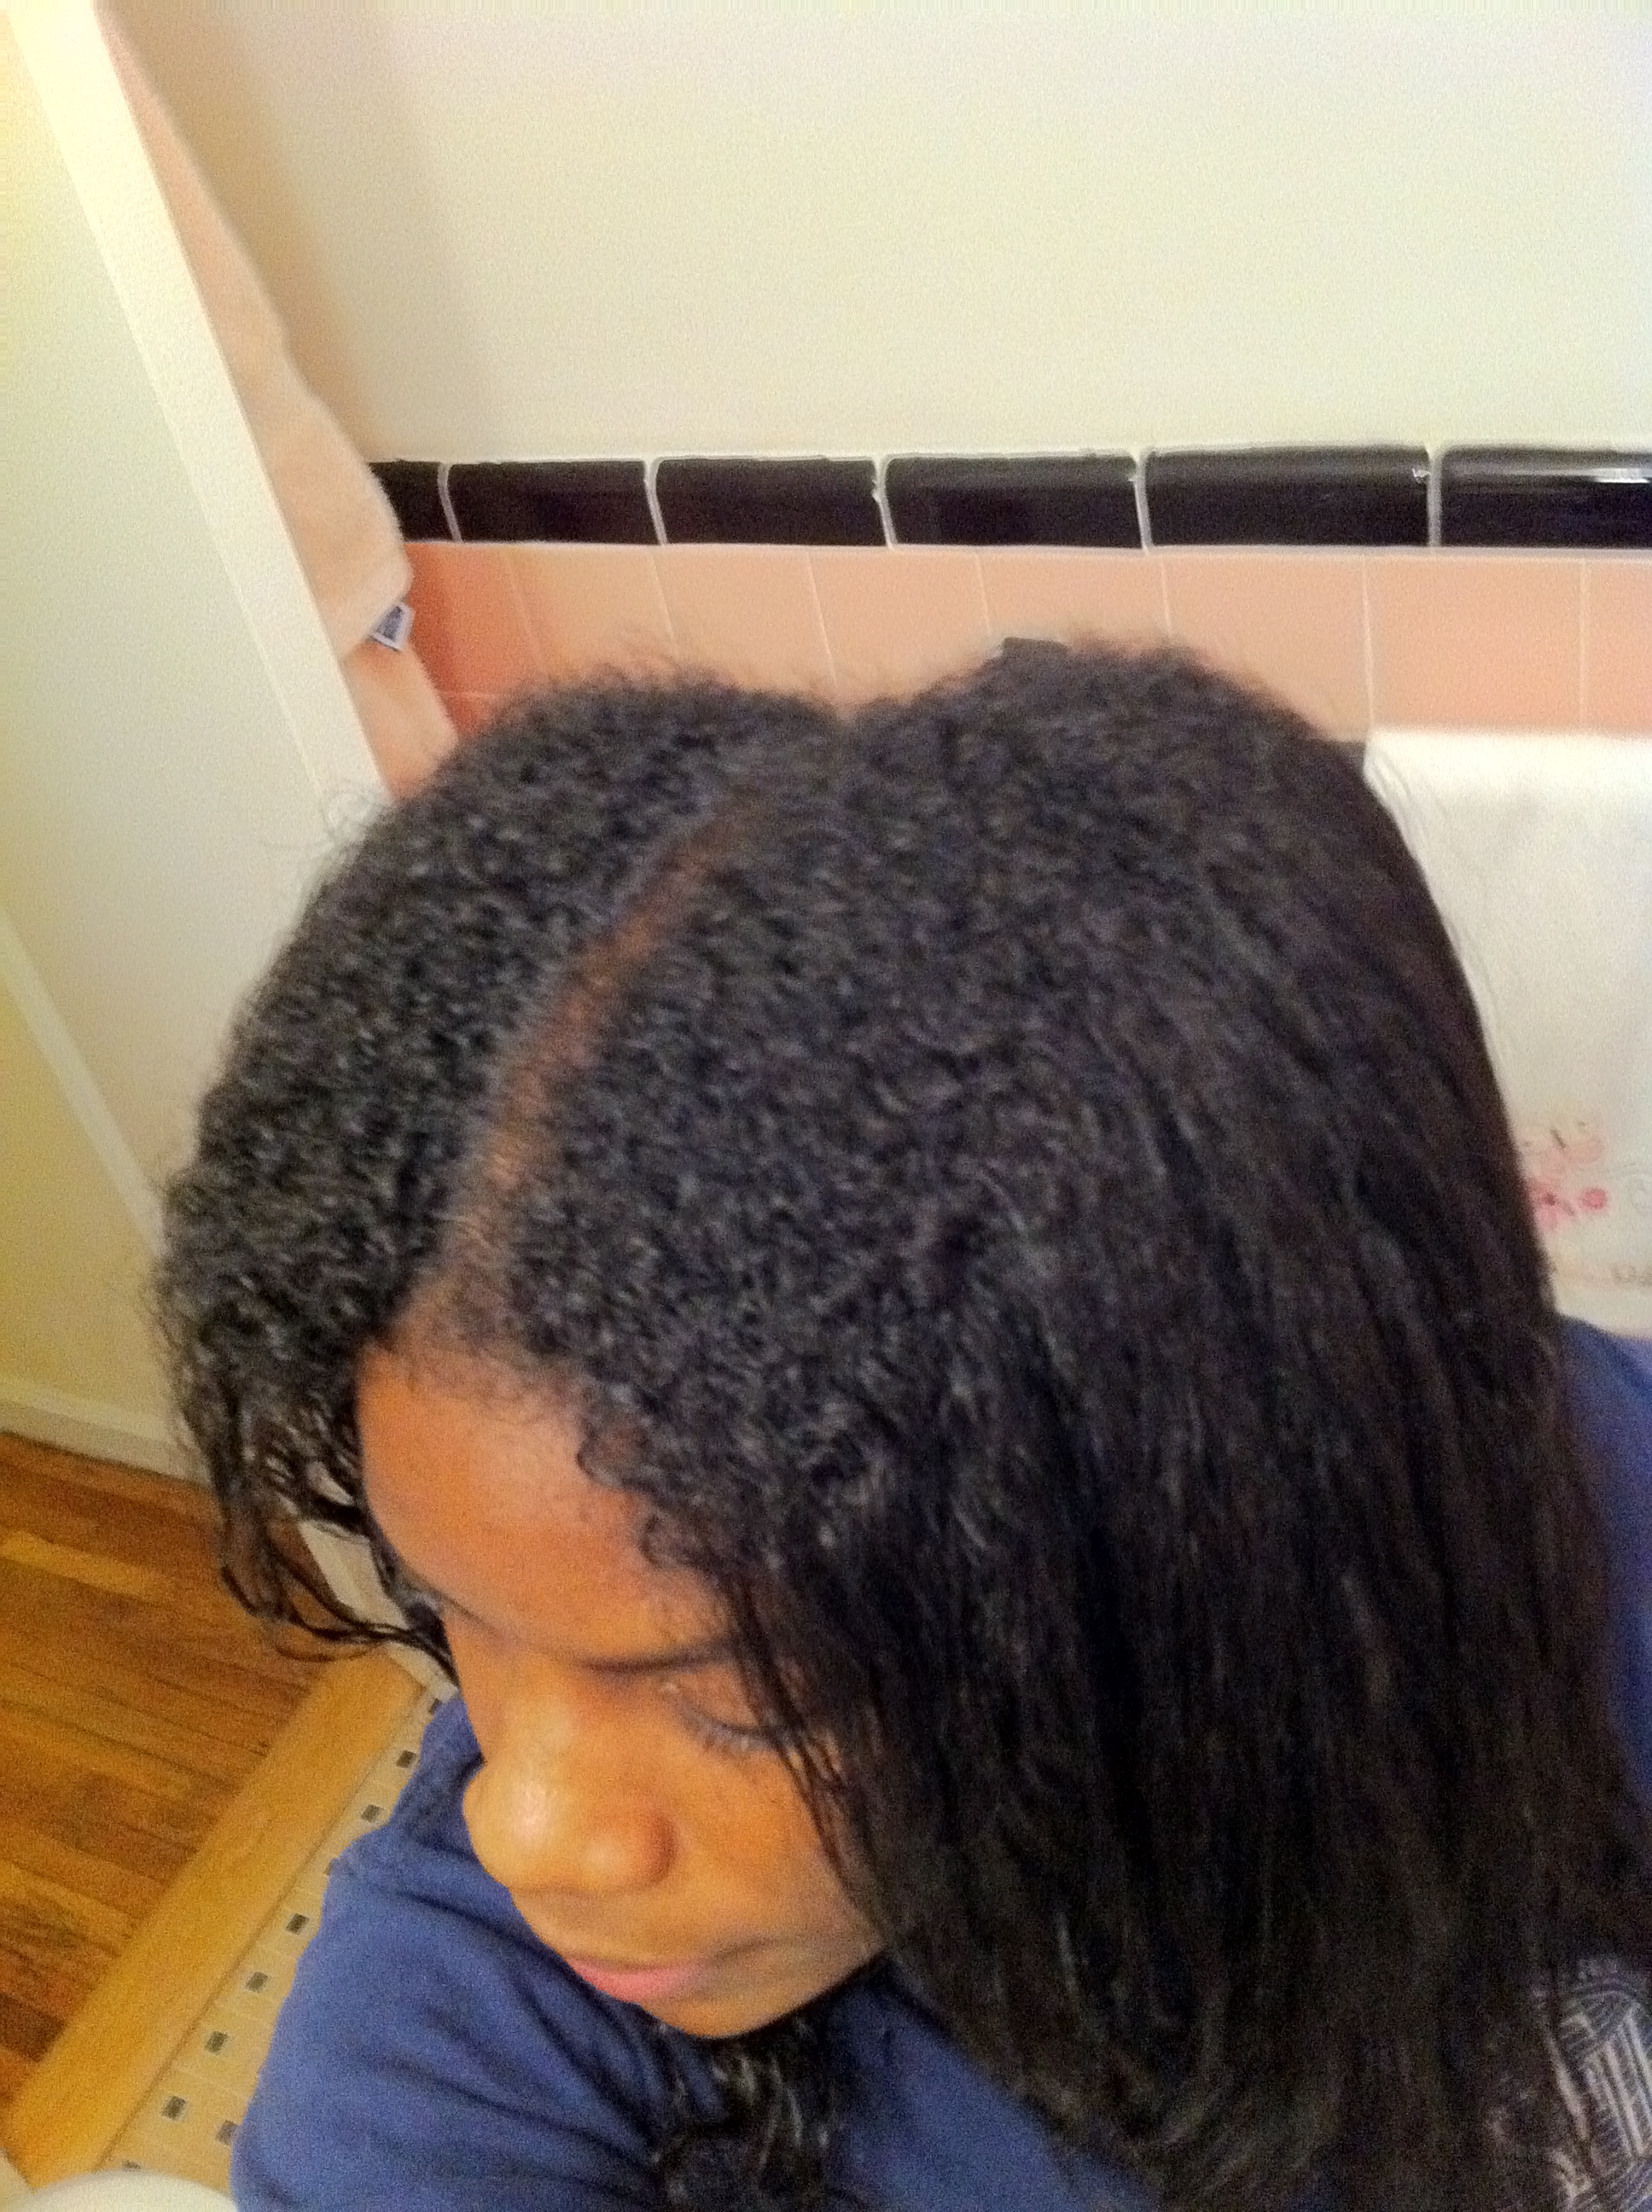 December 12, 2010 – 9 months of new growth on wet hair.